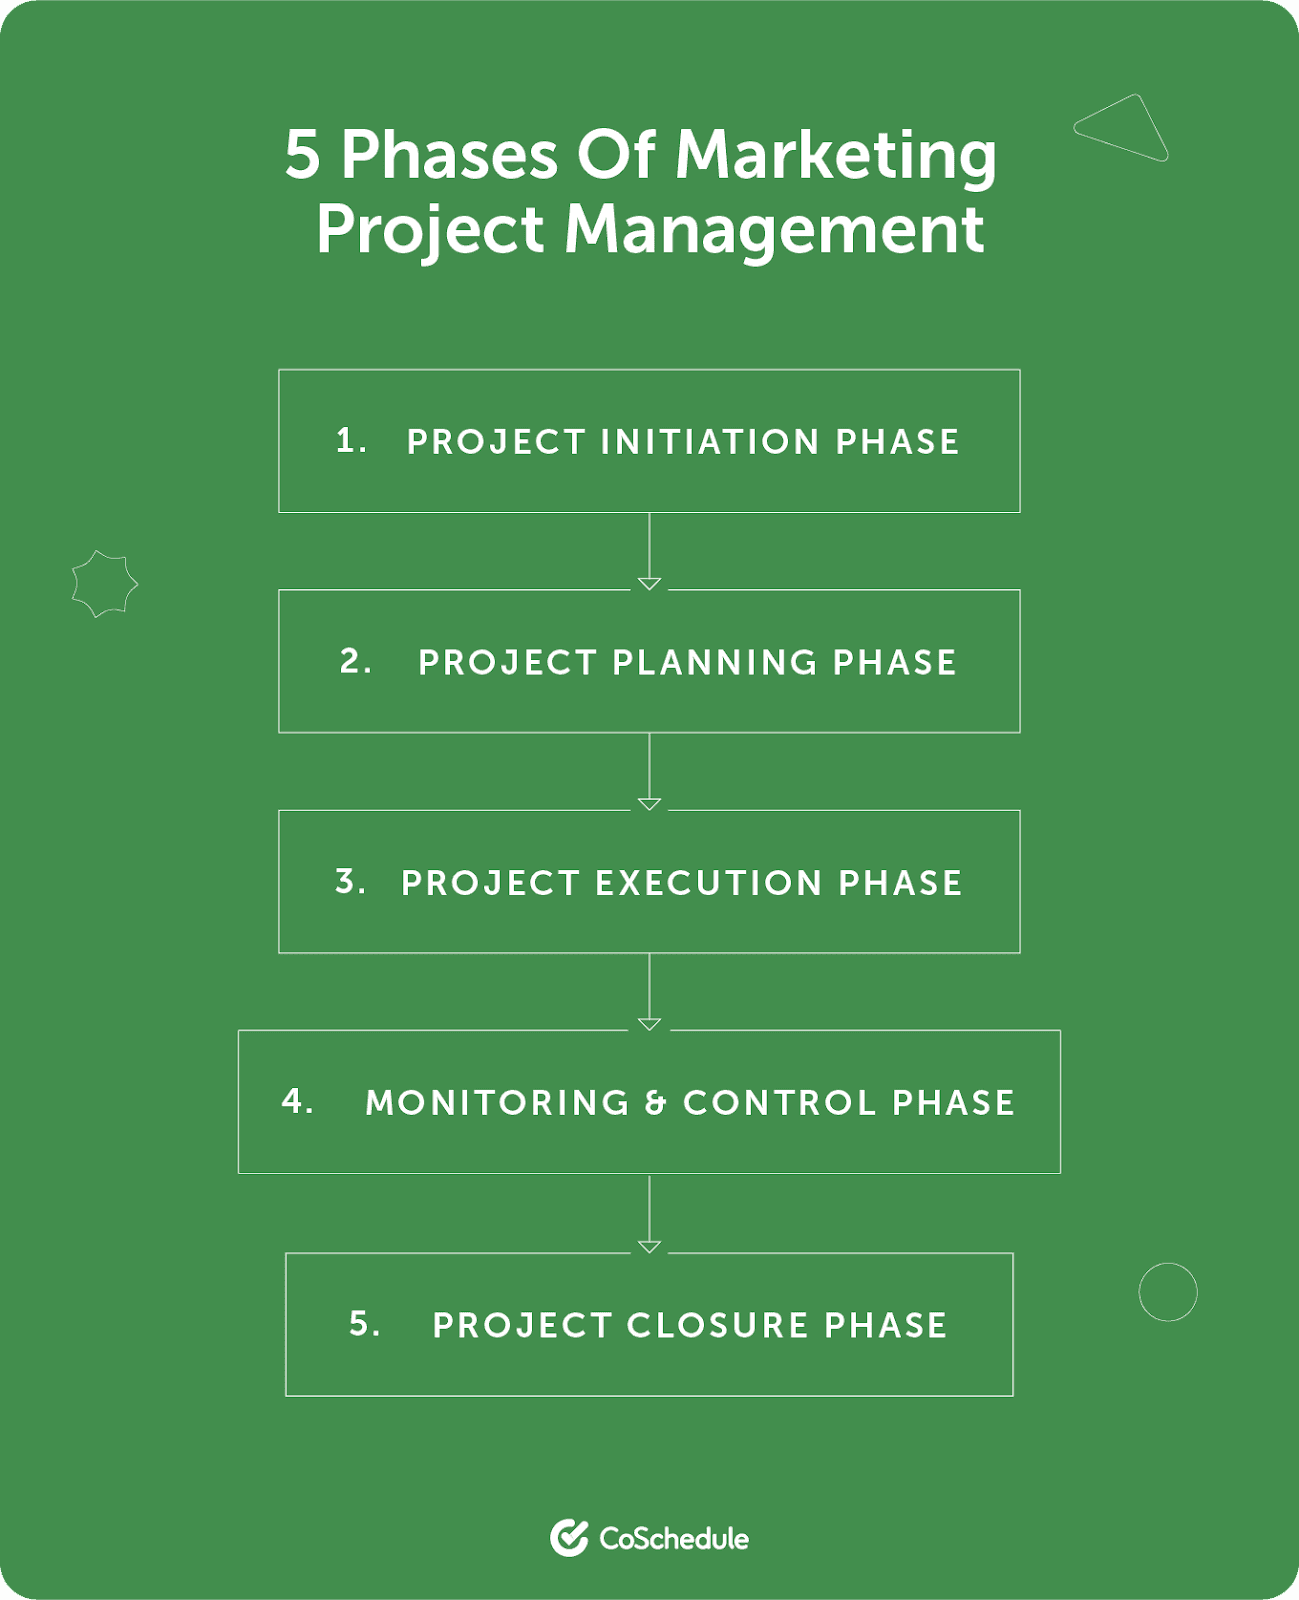 5 phases of marketing project management 